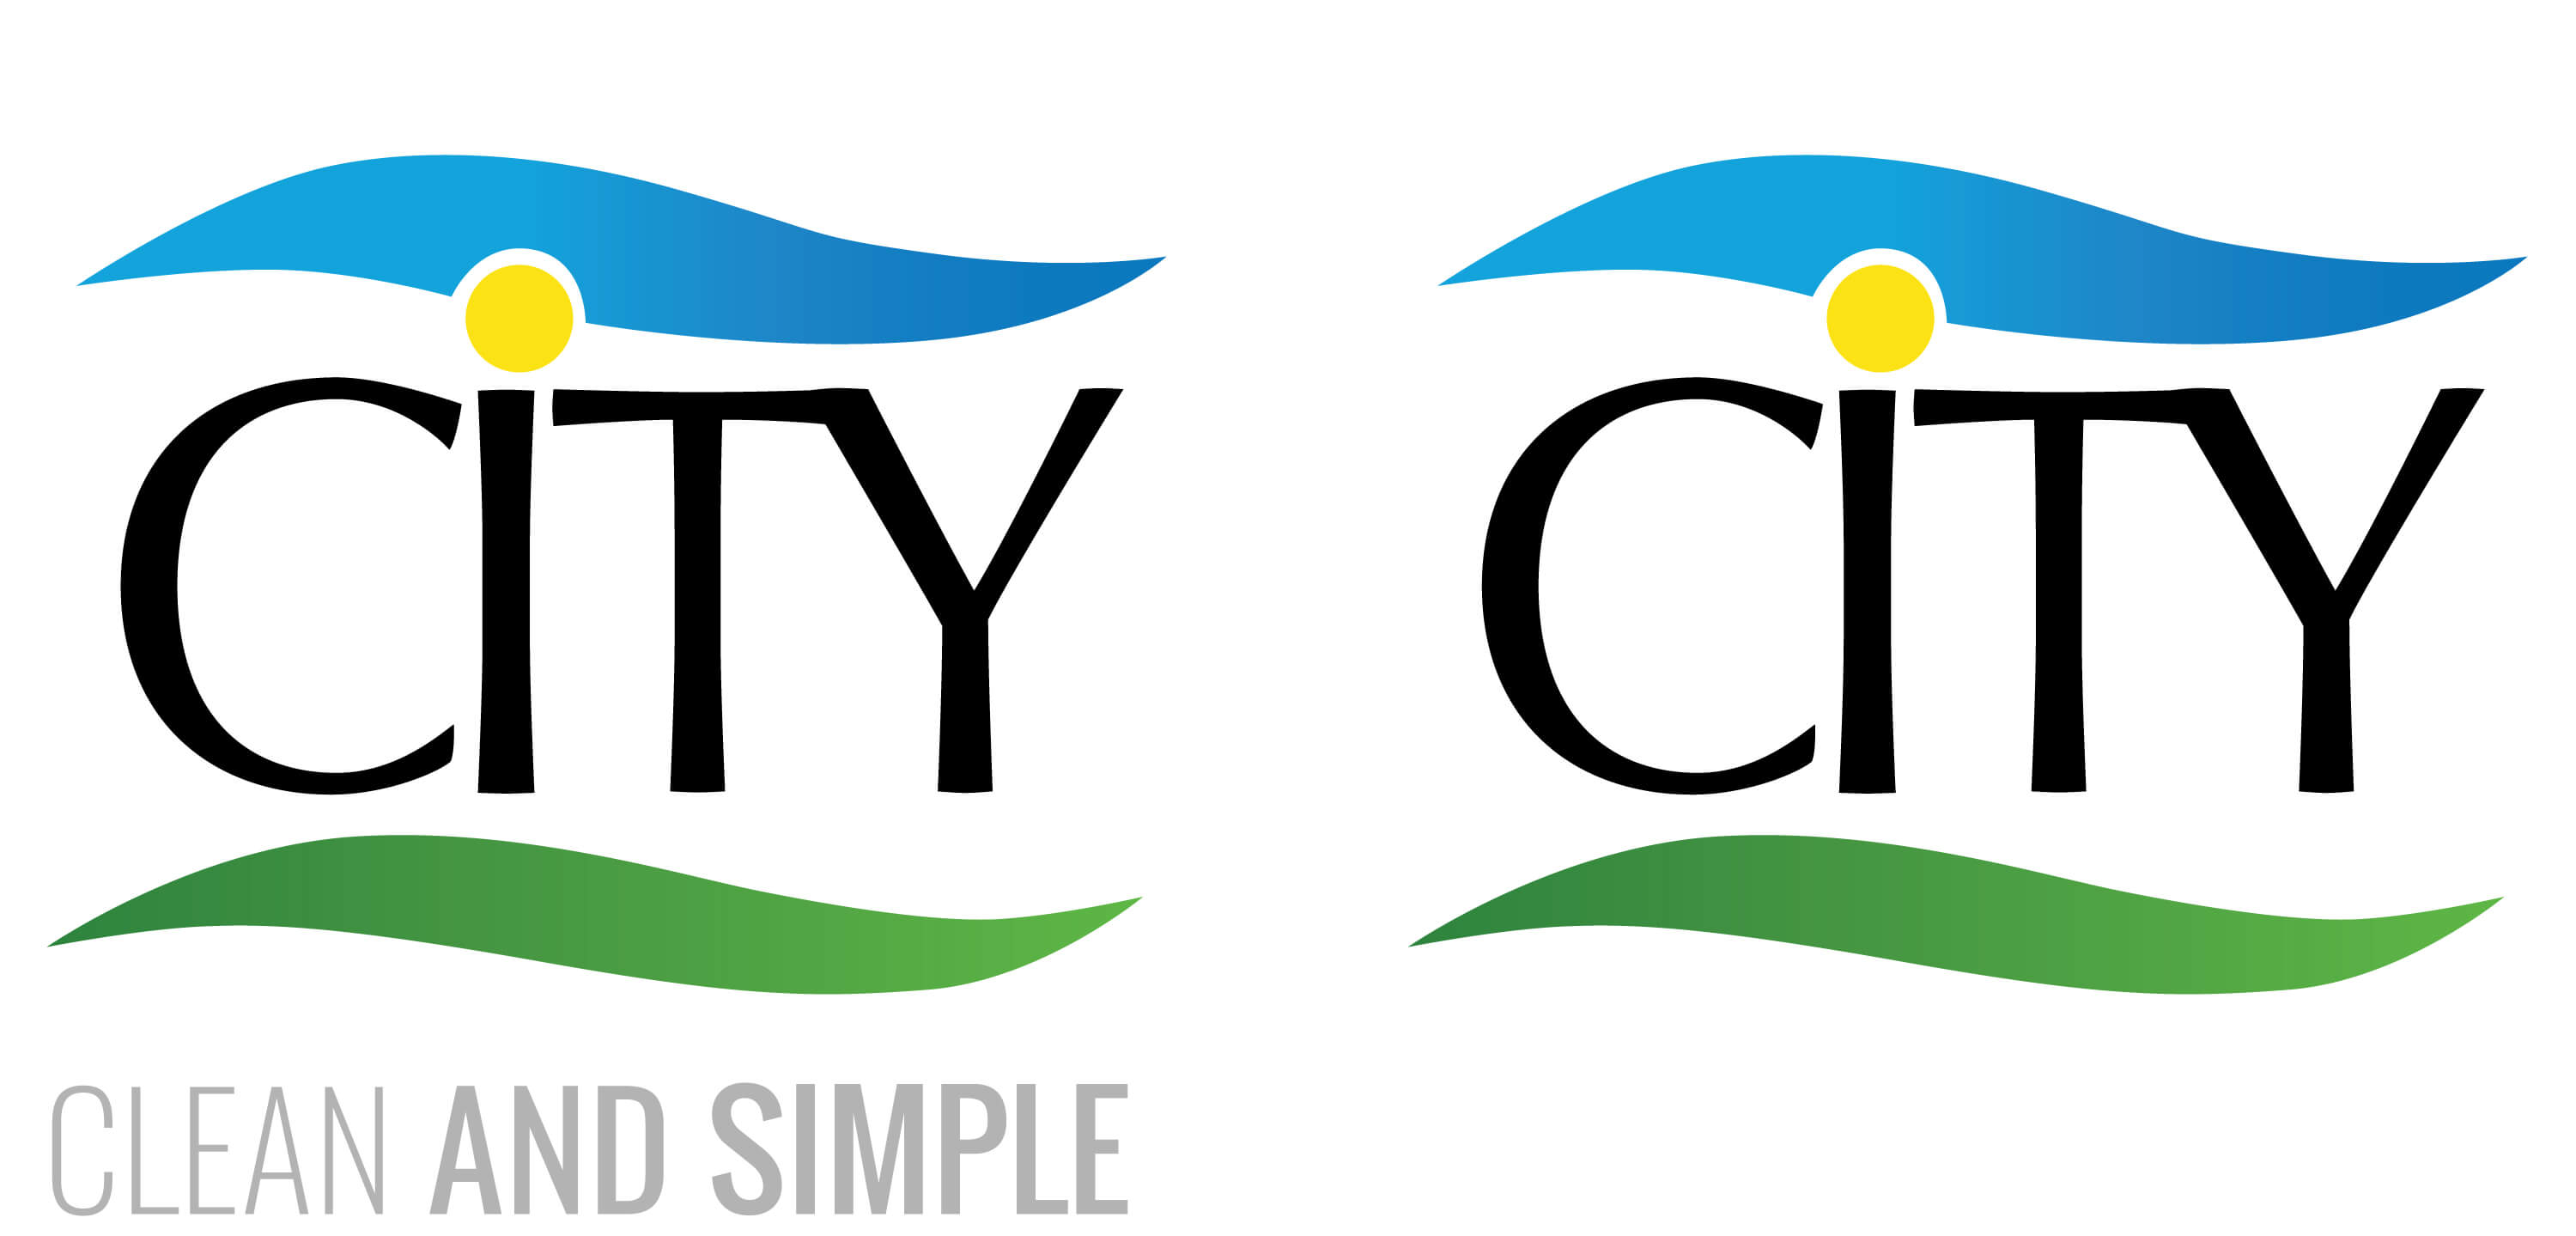 CITY Clean And Simple Colored Logos